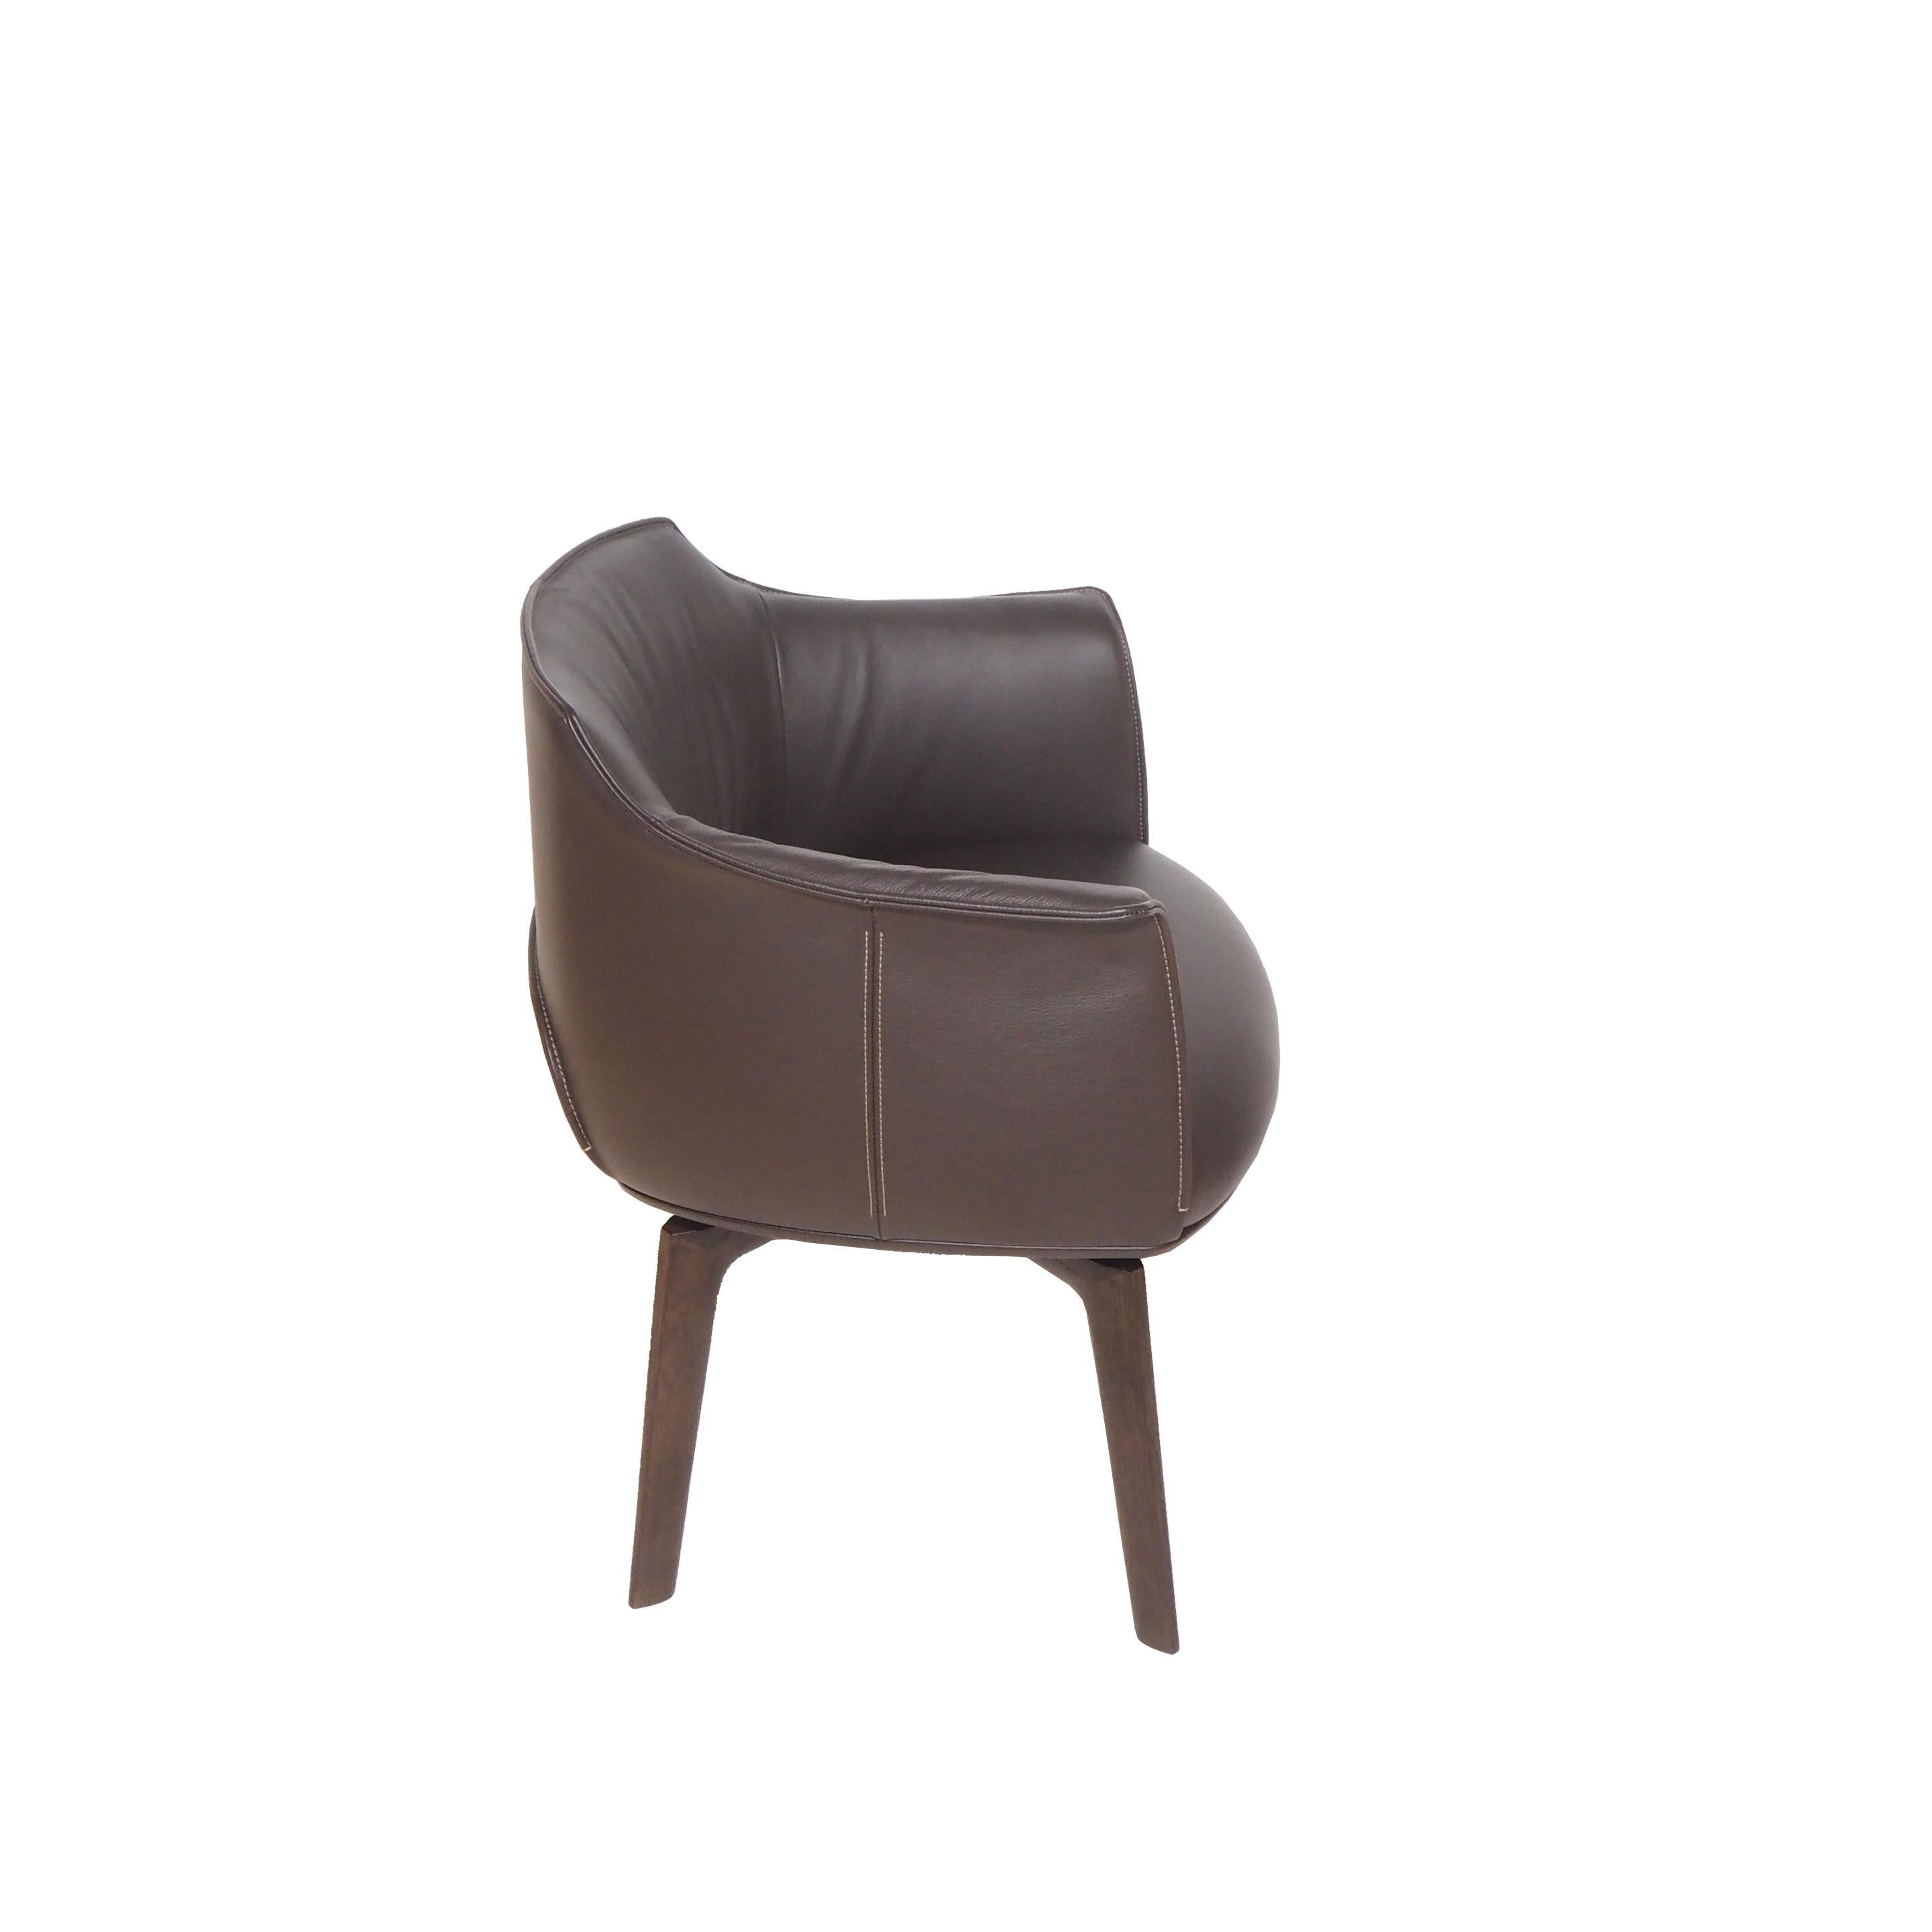 The Archibald swivel dining chair is sculpted, clean and contemporary, softened with a sartorial touch that is evident in every detail, like the sumptuous folds on the inside of the backrest upholstered in leather.

Or the understated armrest that